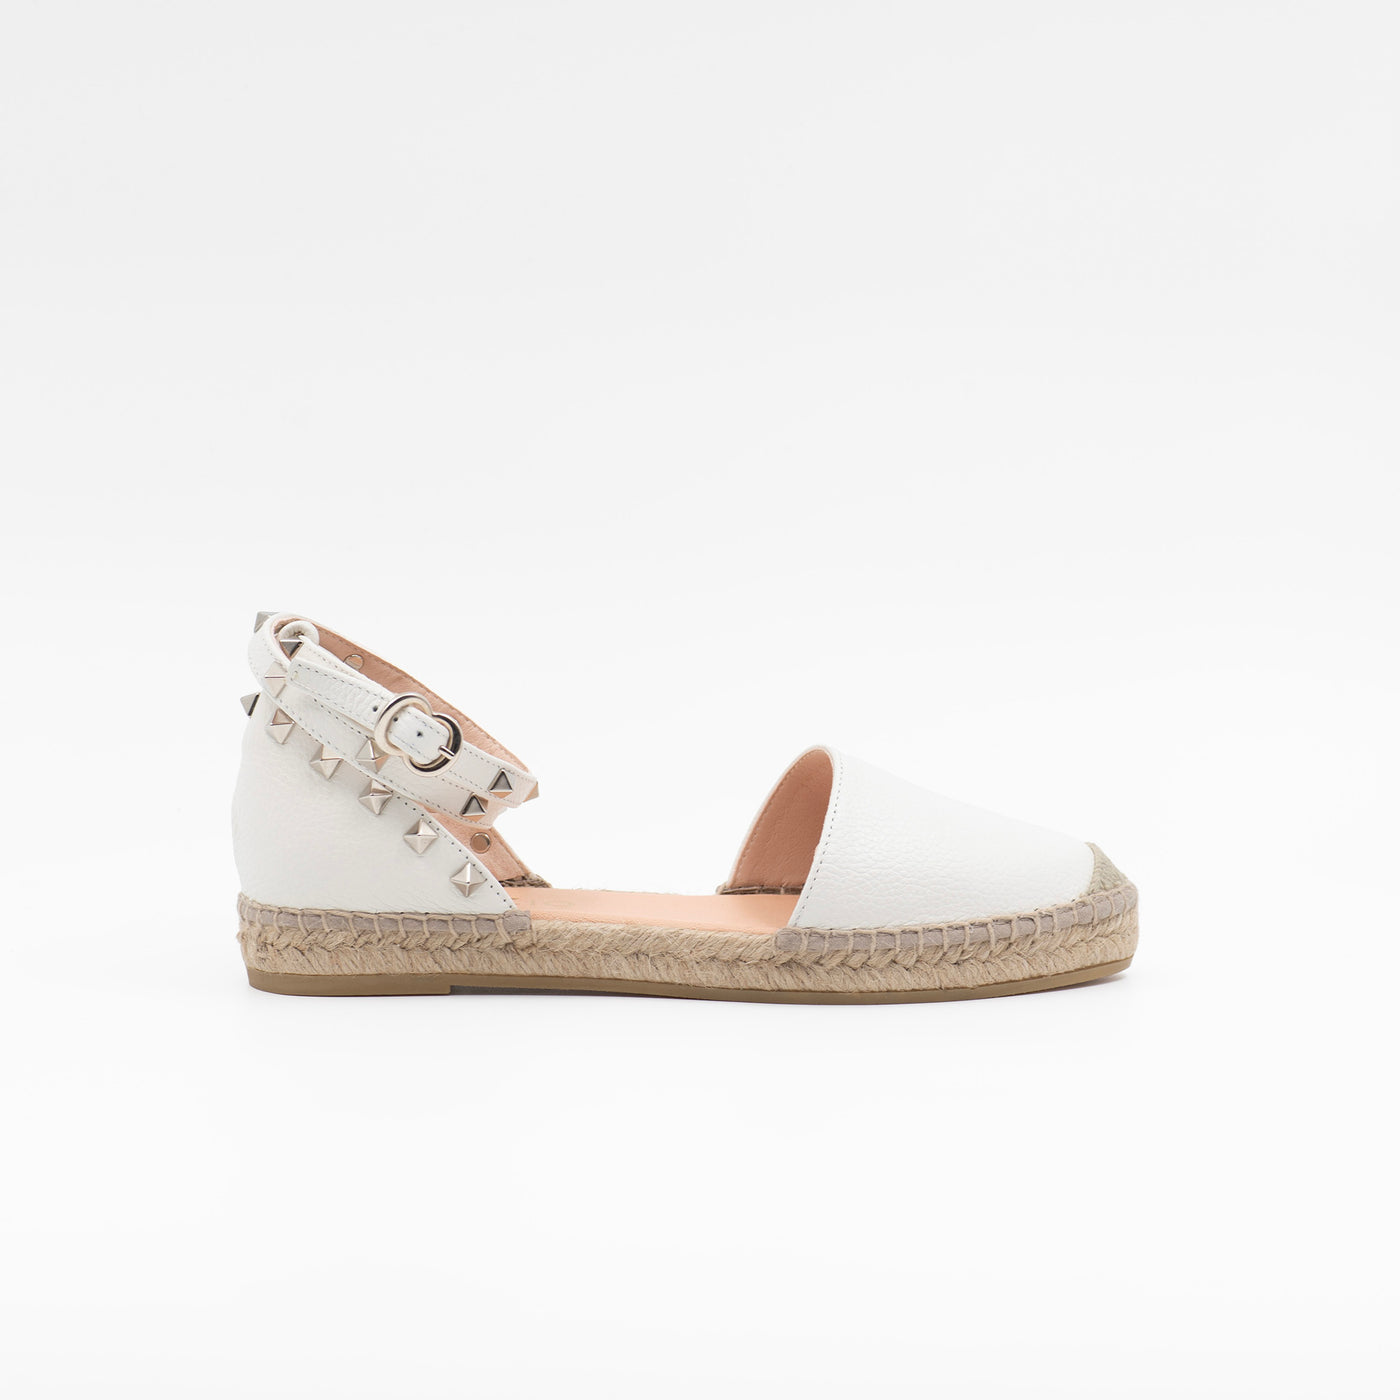 White espadrille sandal with silver studs